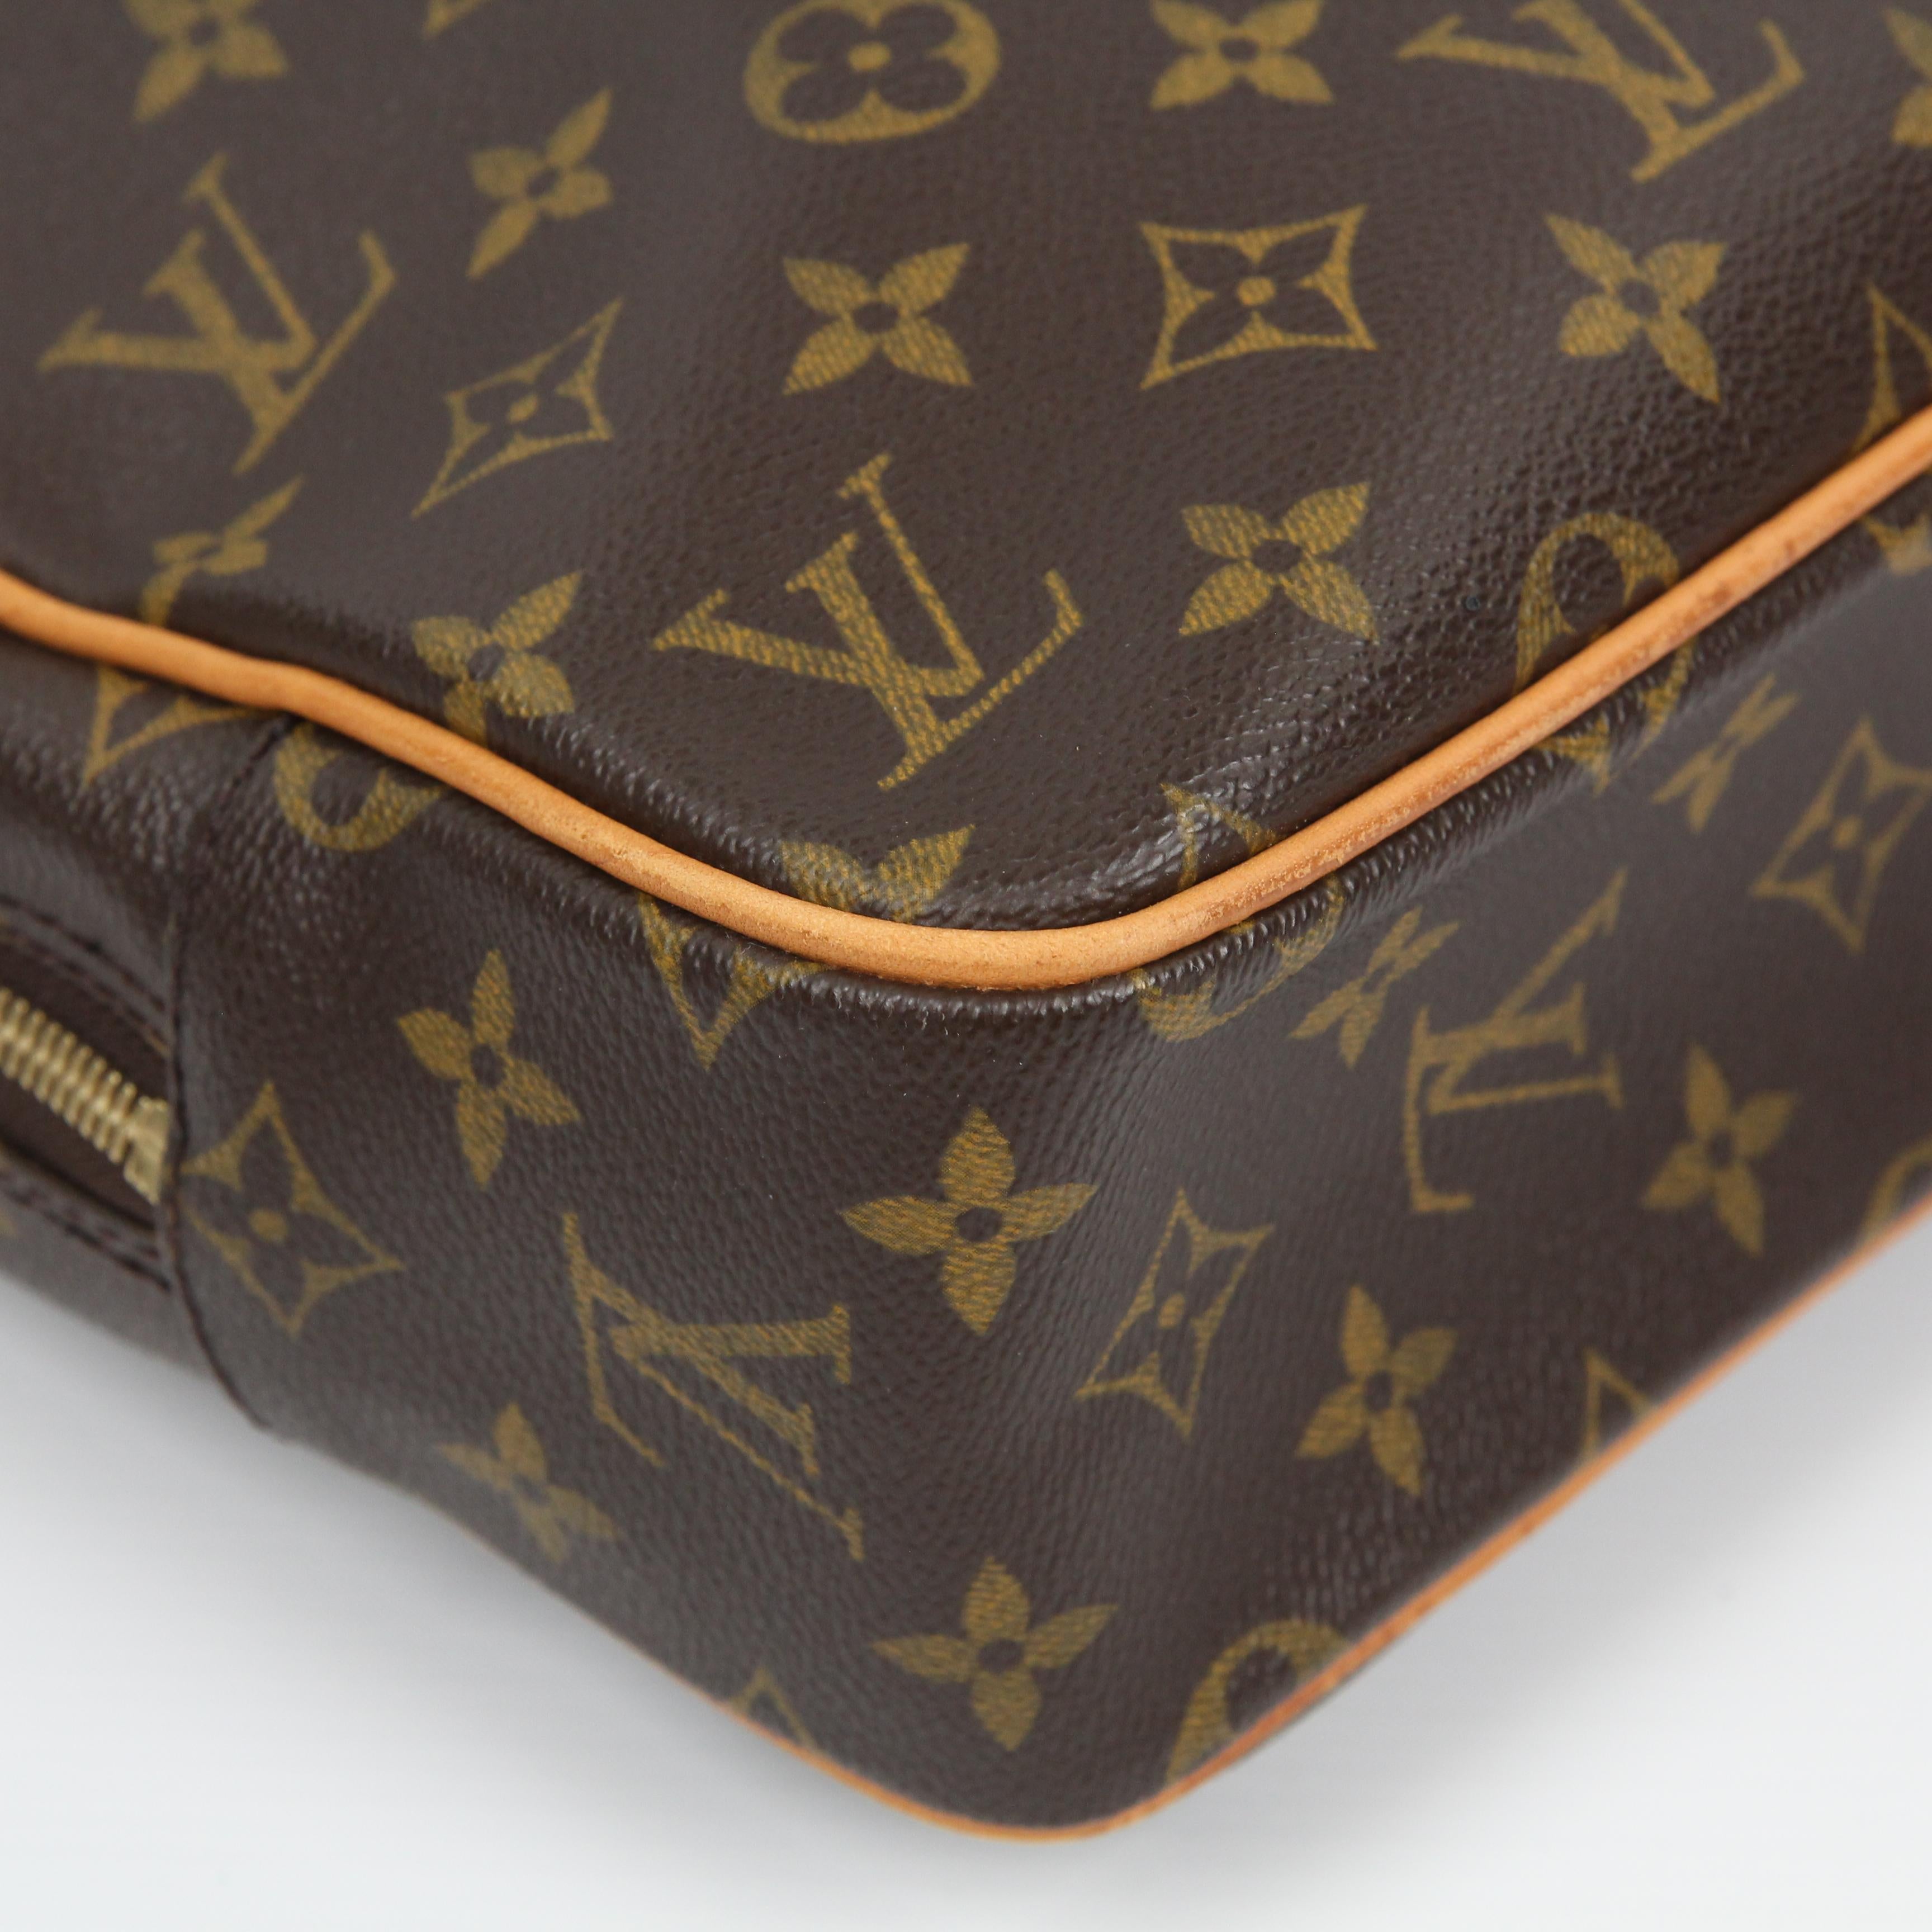 This beautiful and classy Louis Vuitton Monogram Canvas Porte Documents Pegase Soft Briefcase Bag is perfect for anyone who wants to carry their precious documents in style. It opens to reveal and roomy interior with pockets and slots to organize